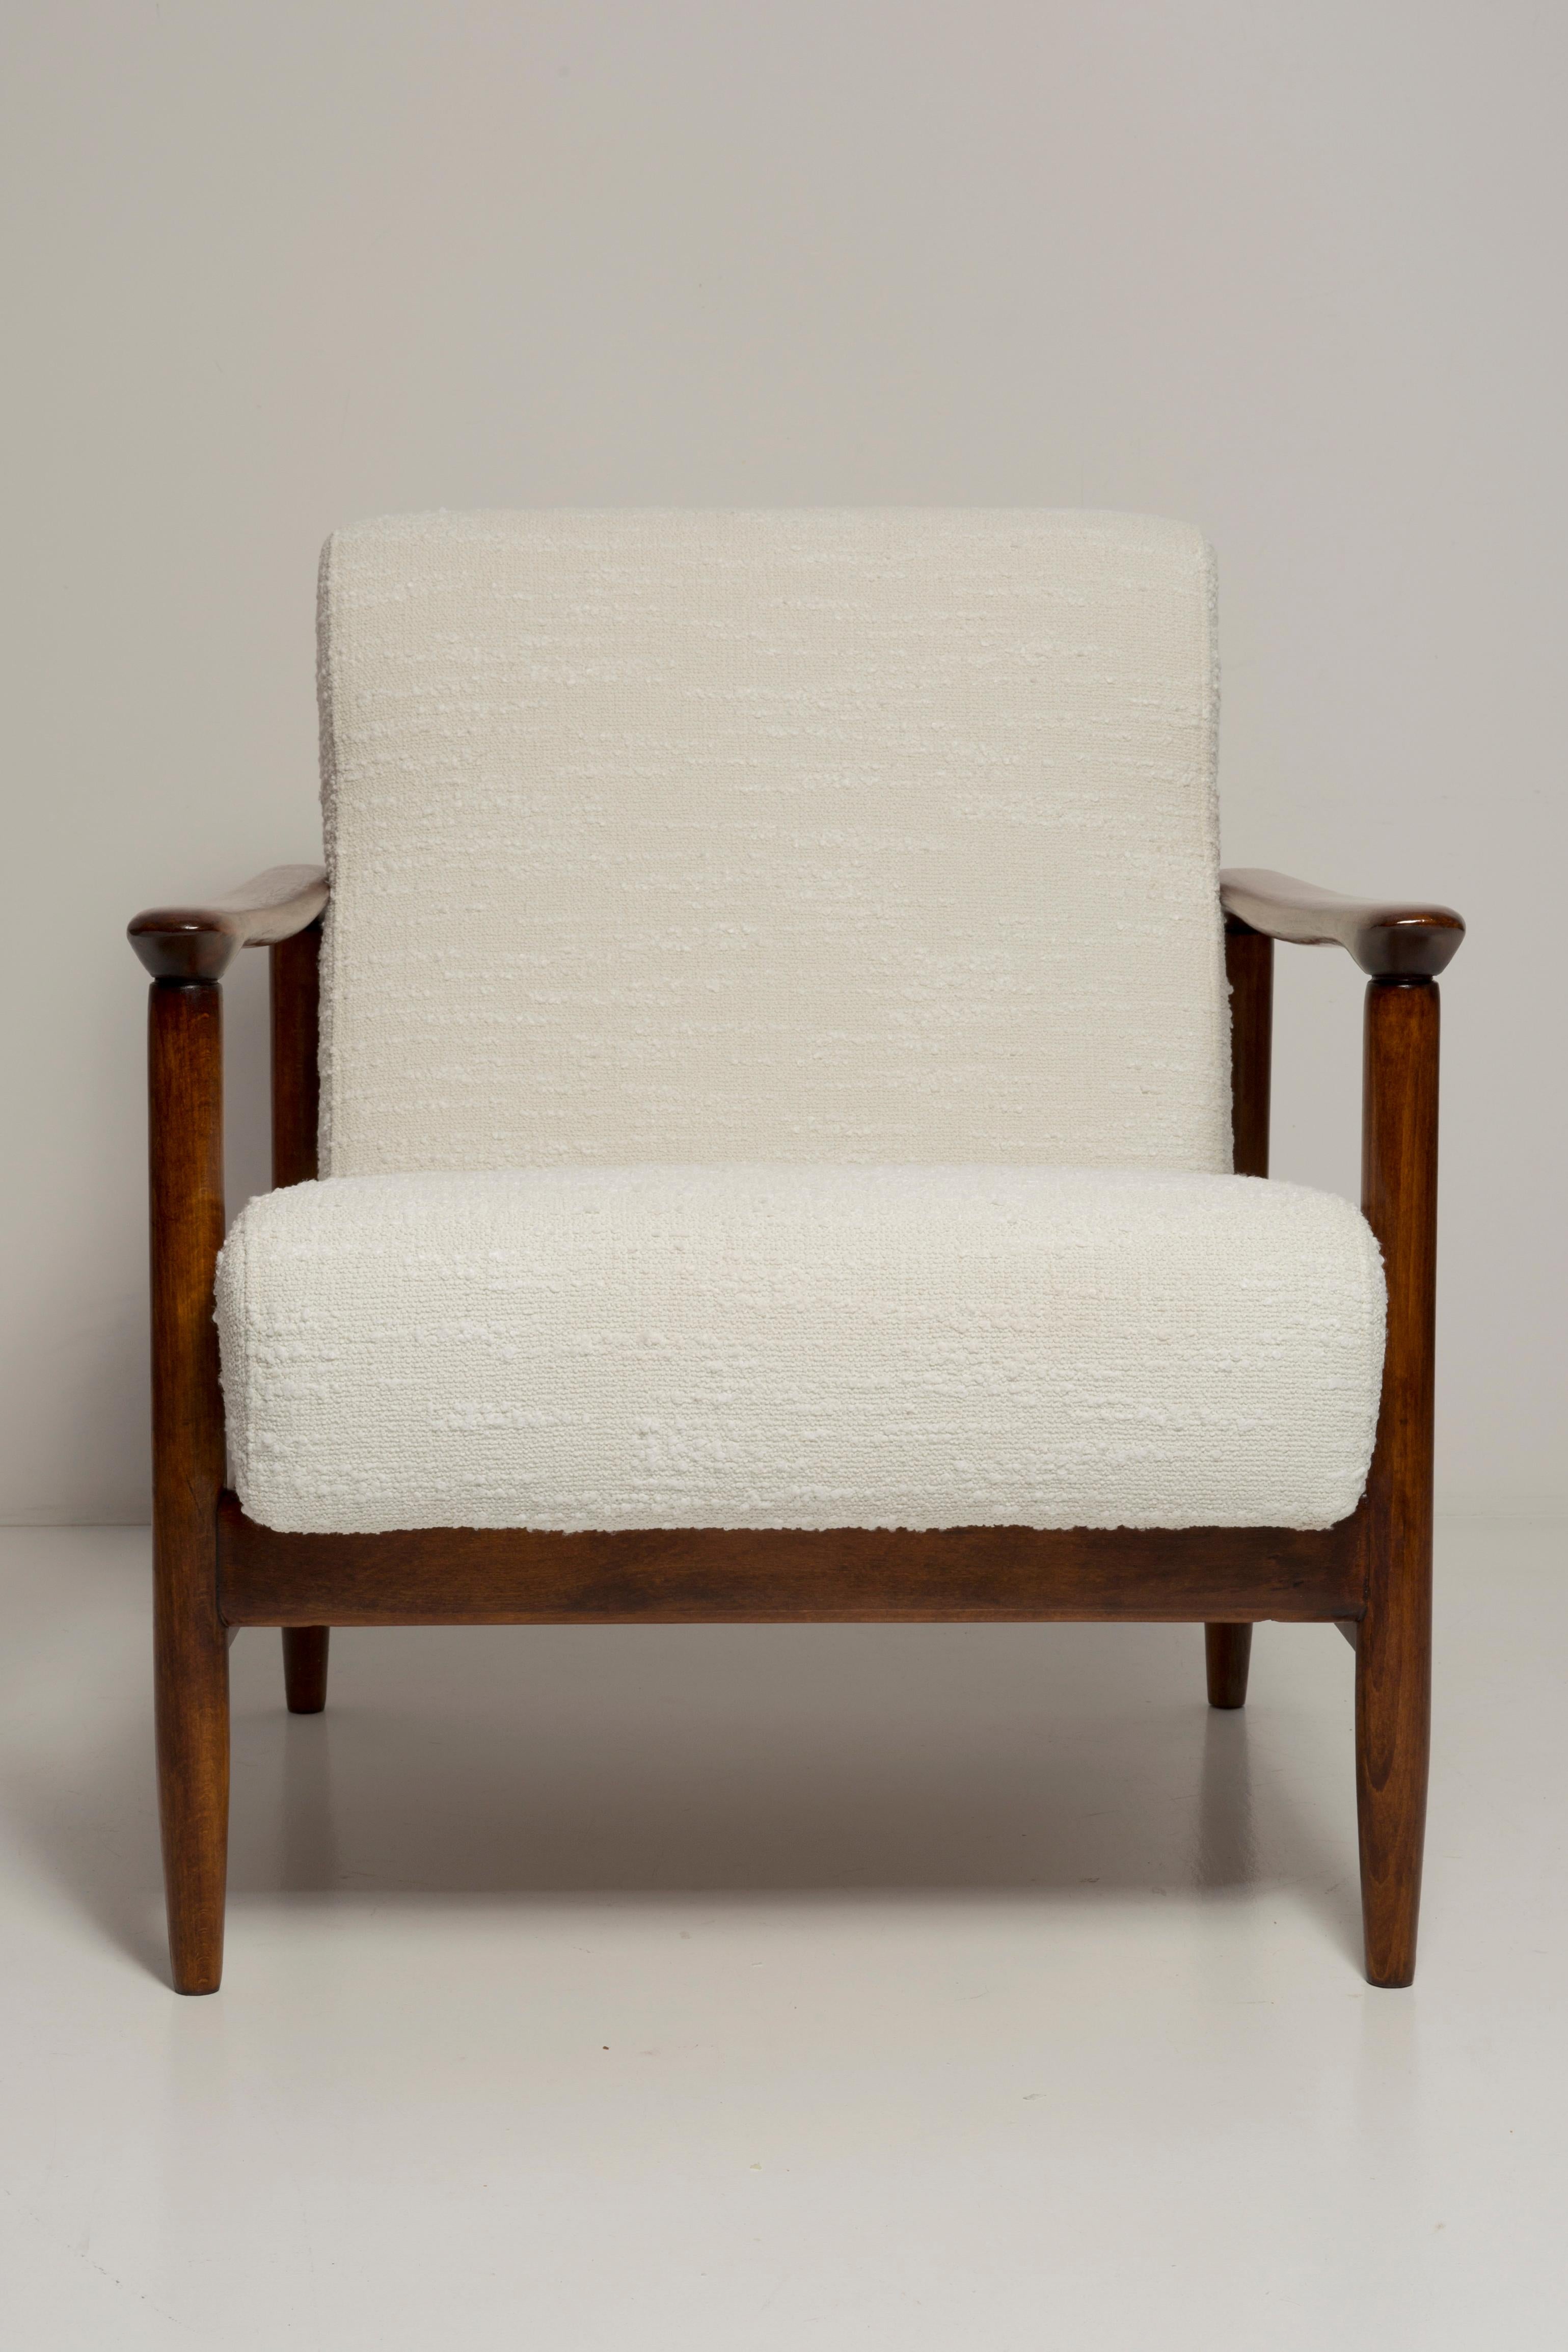 Fabric Pair of Mid Century White Boucle Armchairs, GFM 142, Edmund Homa, Europe, 1960s For Sale